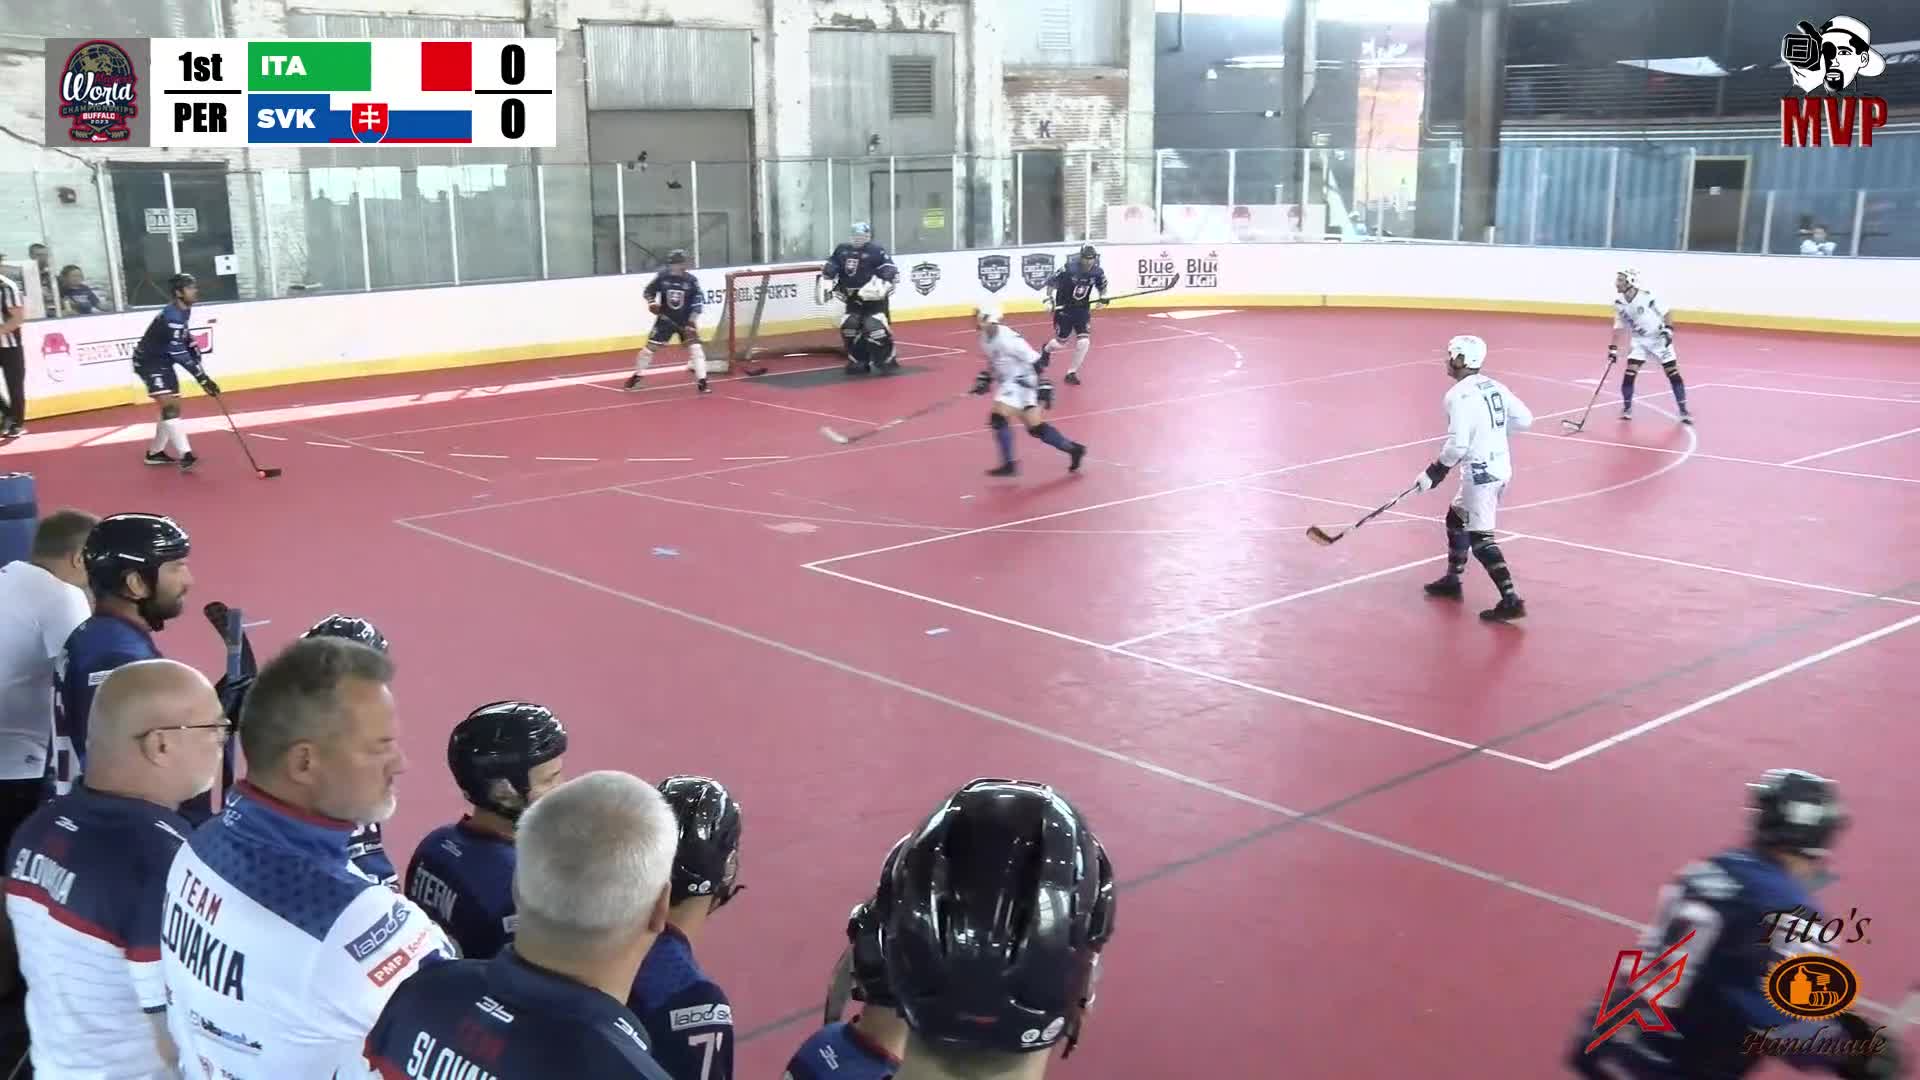 USA Ball Hockey Live coverage of the Masters World Championships Live Stream, Scores, Schedule